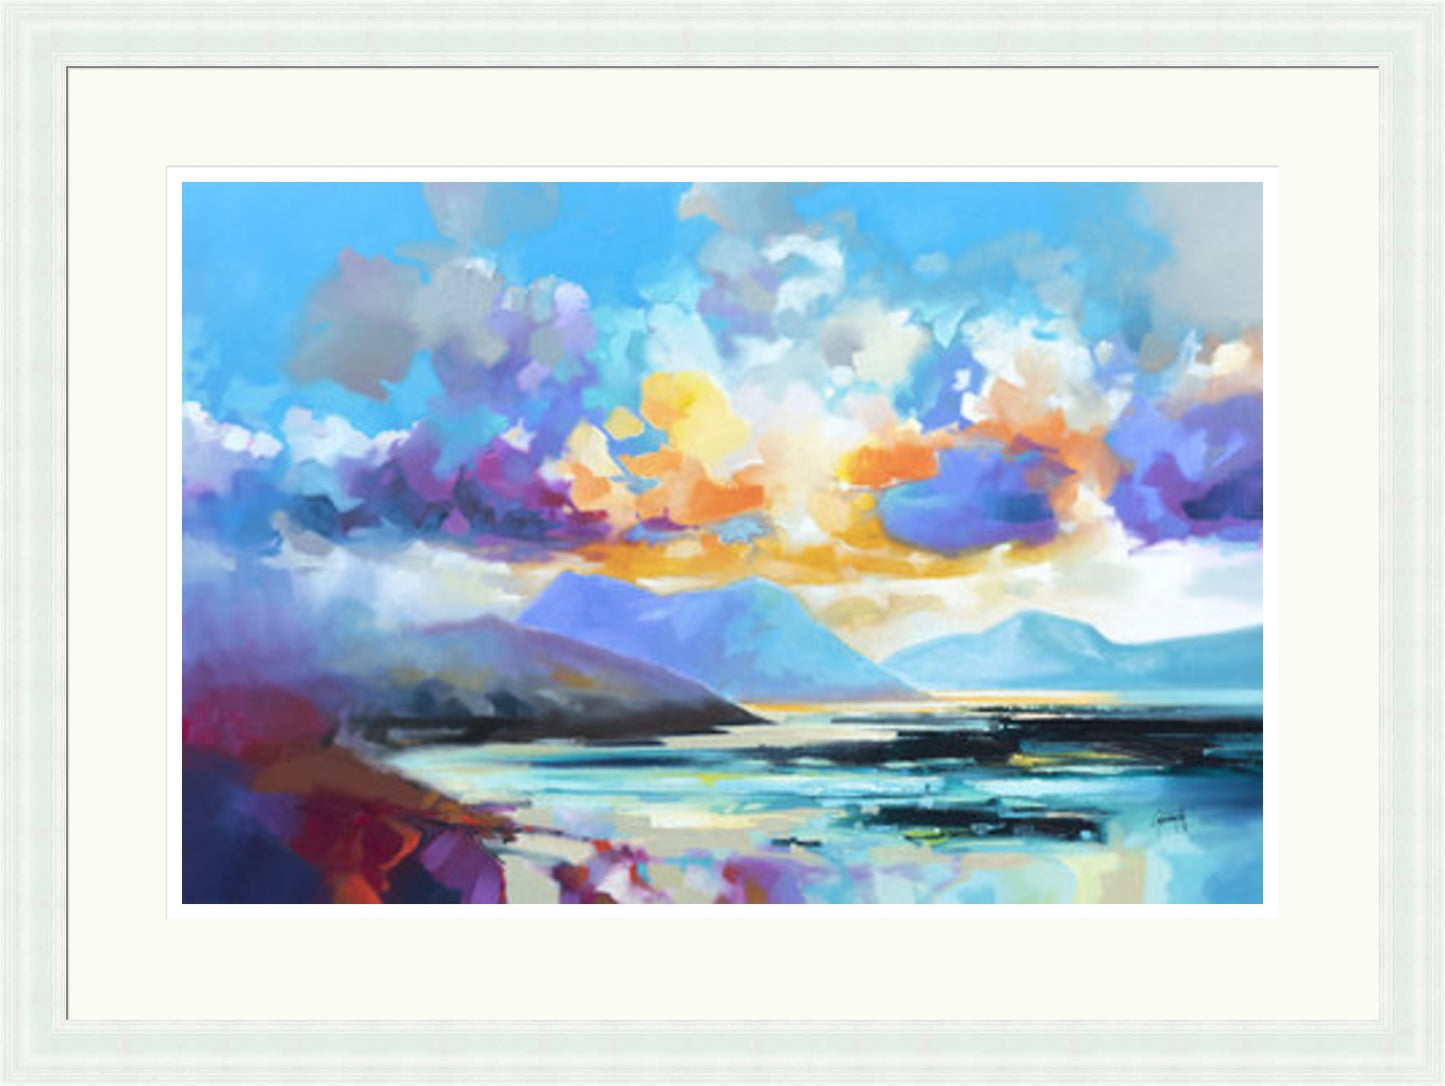 Memories of Skye (Limited Edition) by Scott Naismith